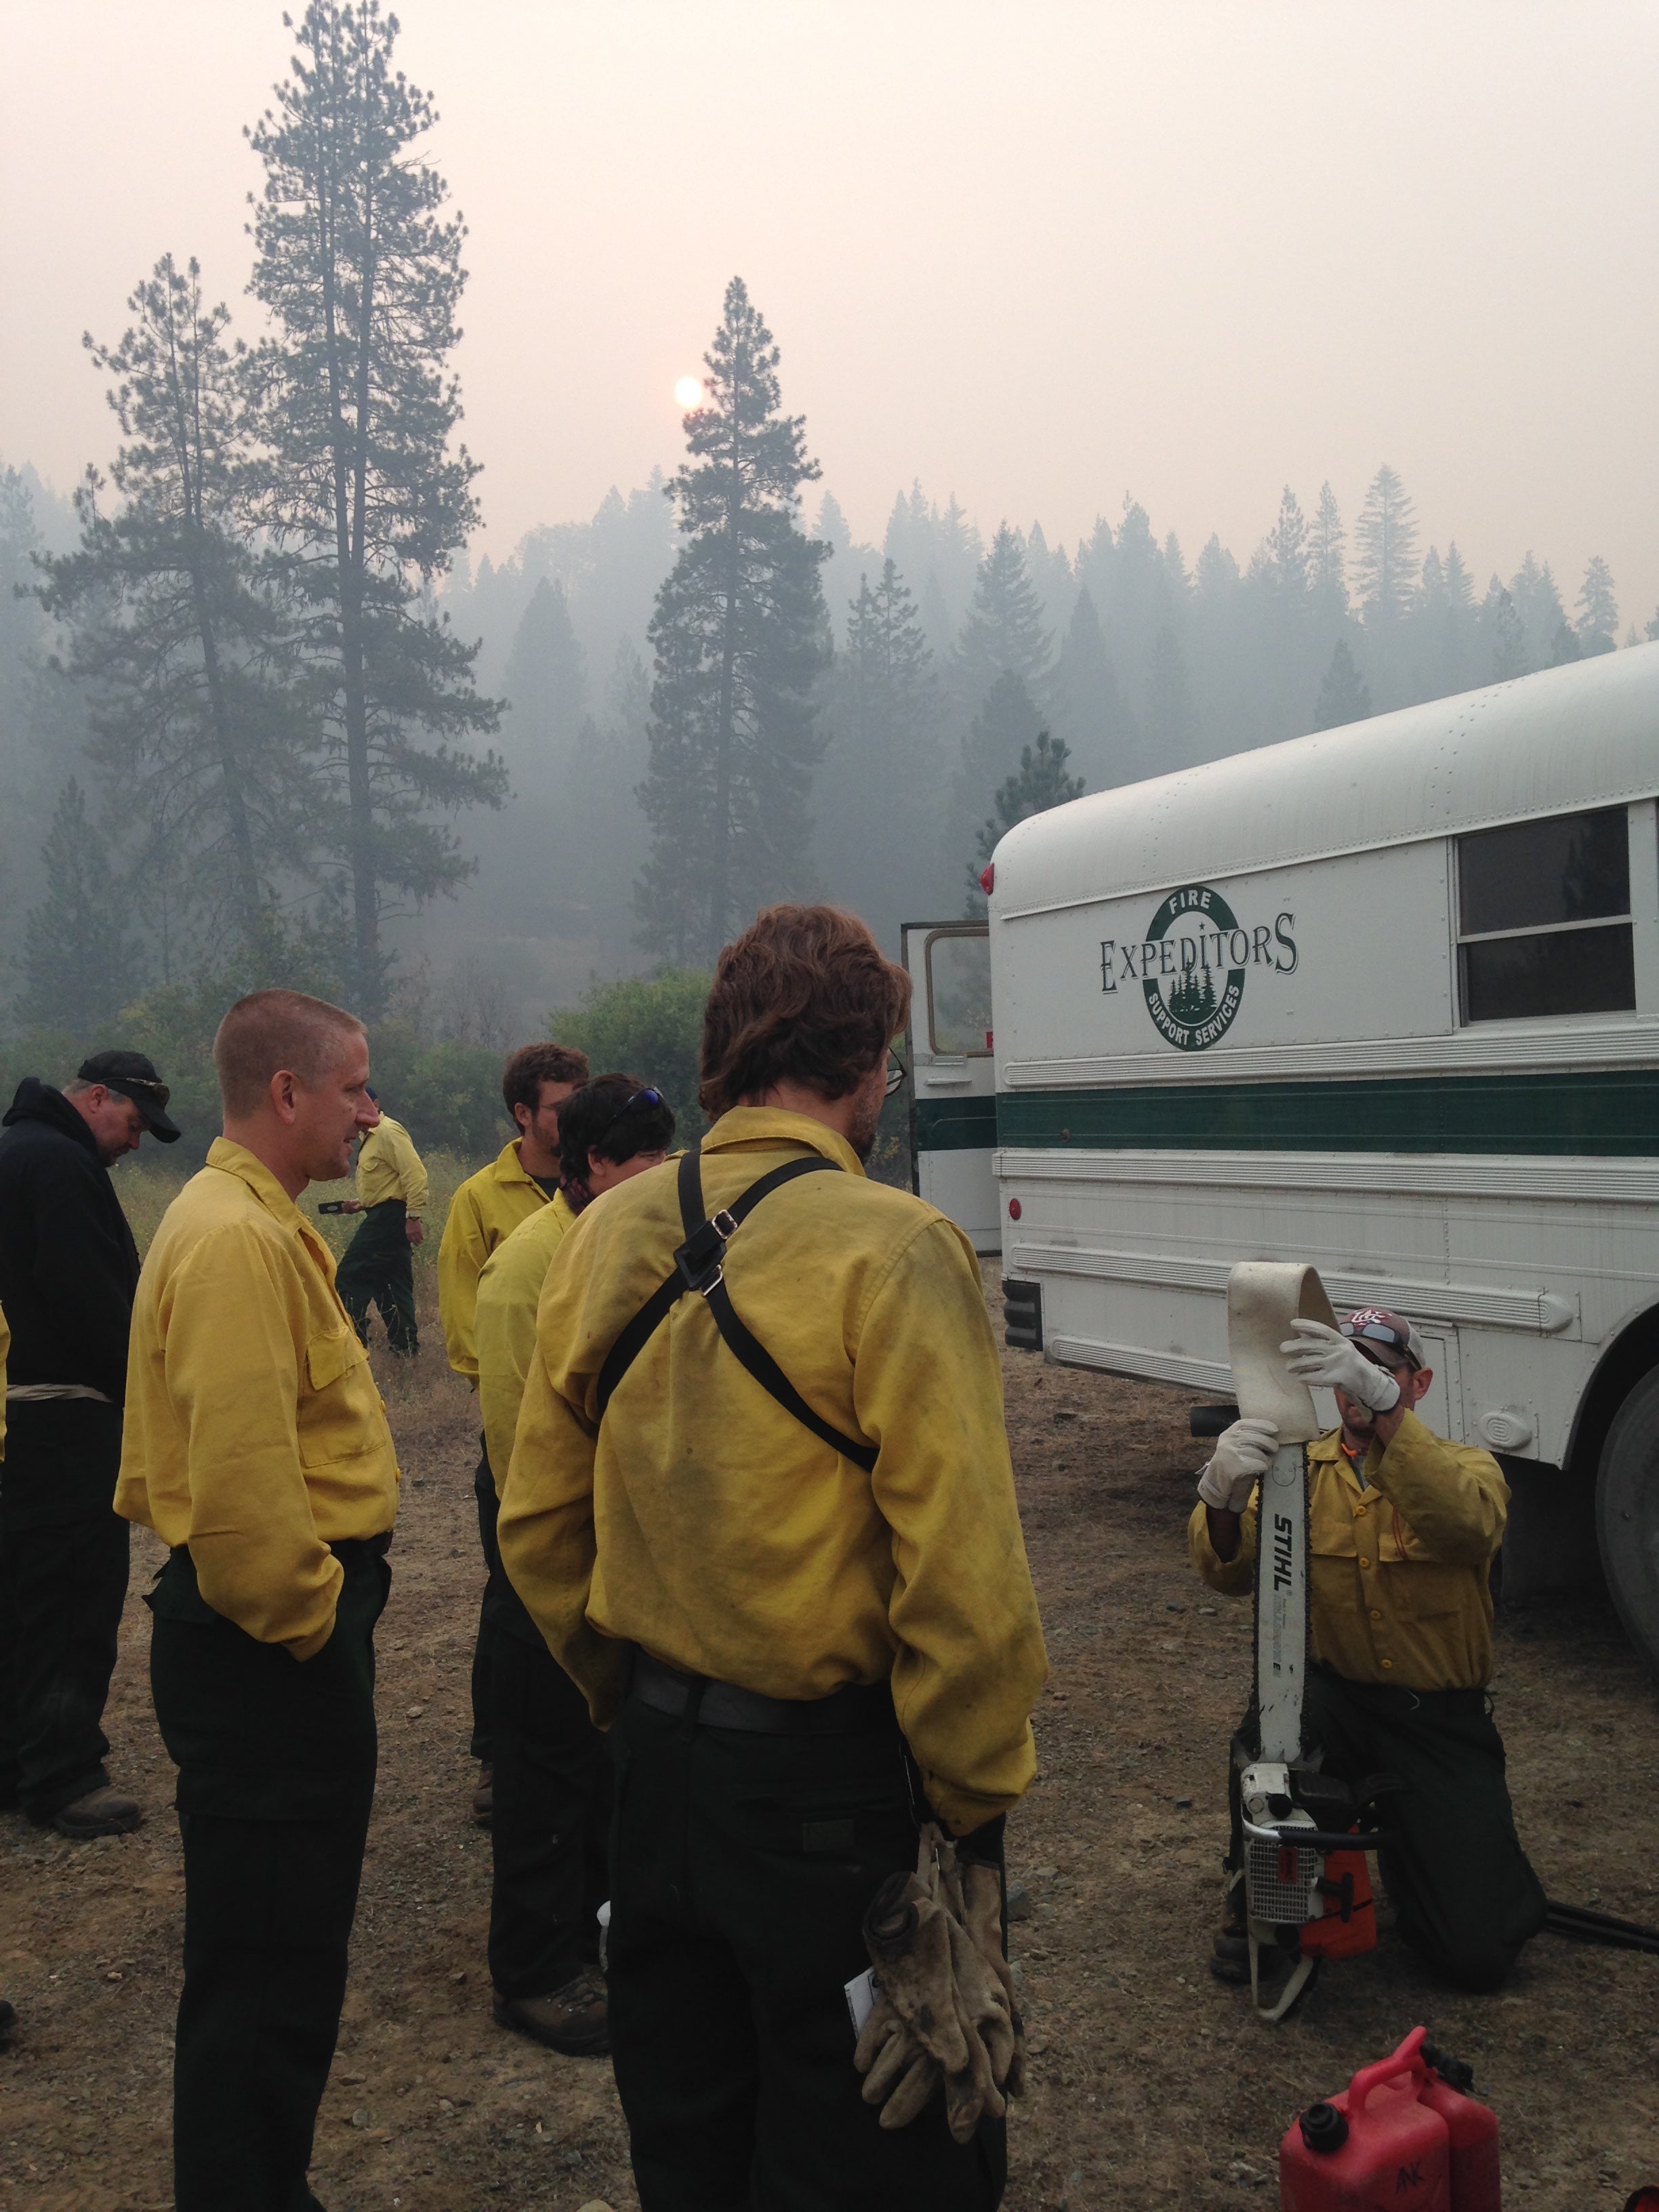  Delaware's wildland fire crew is working to extinguish flames in California. (courtesy: Delaware Forest service)  